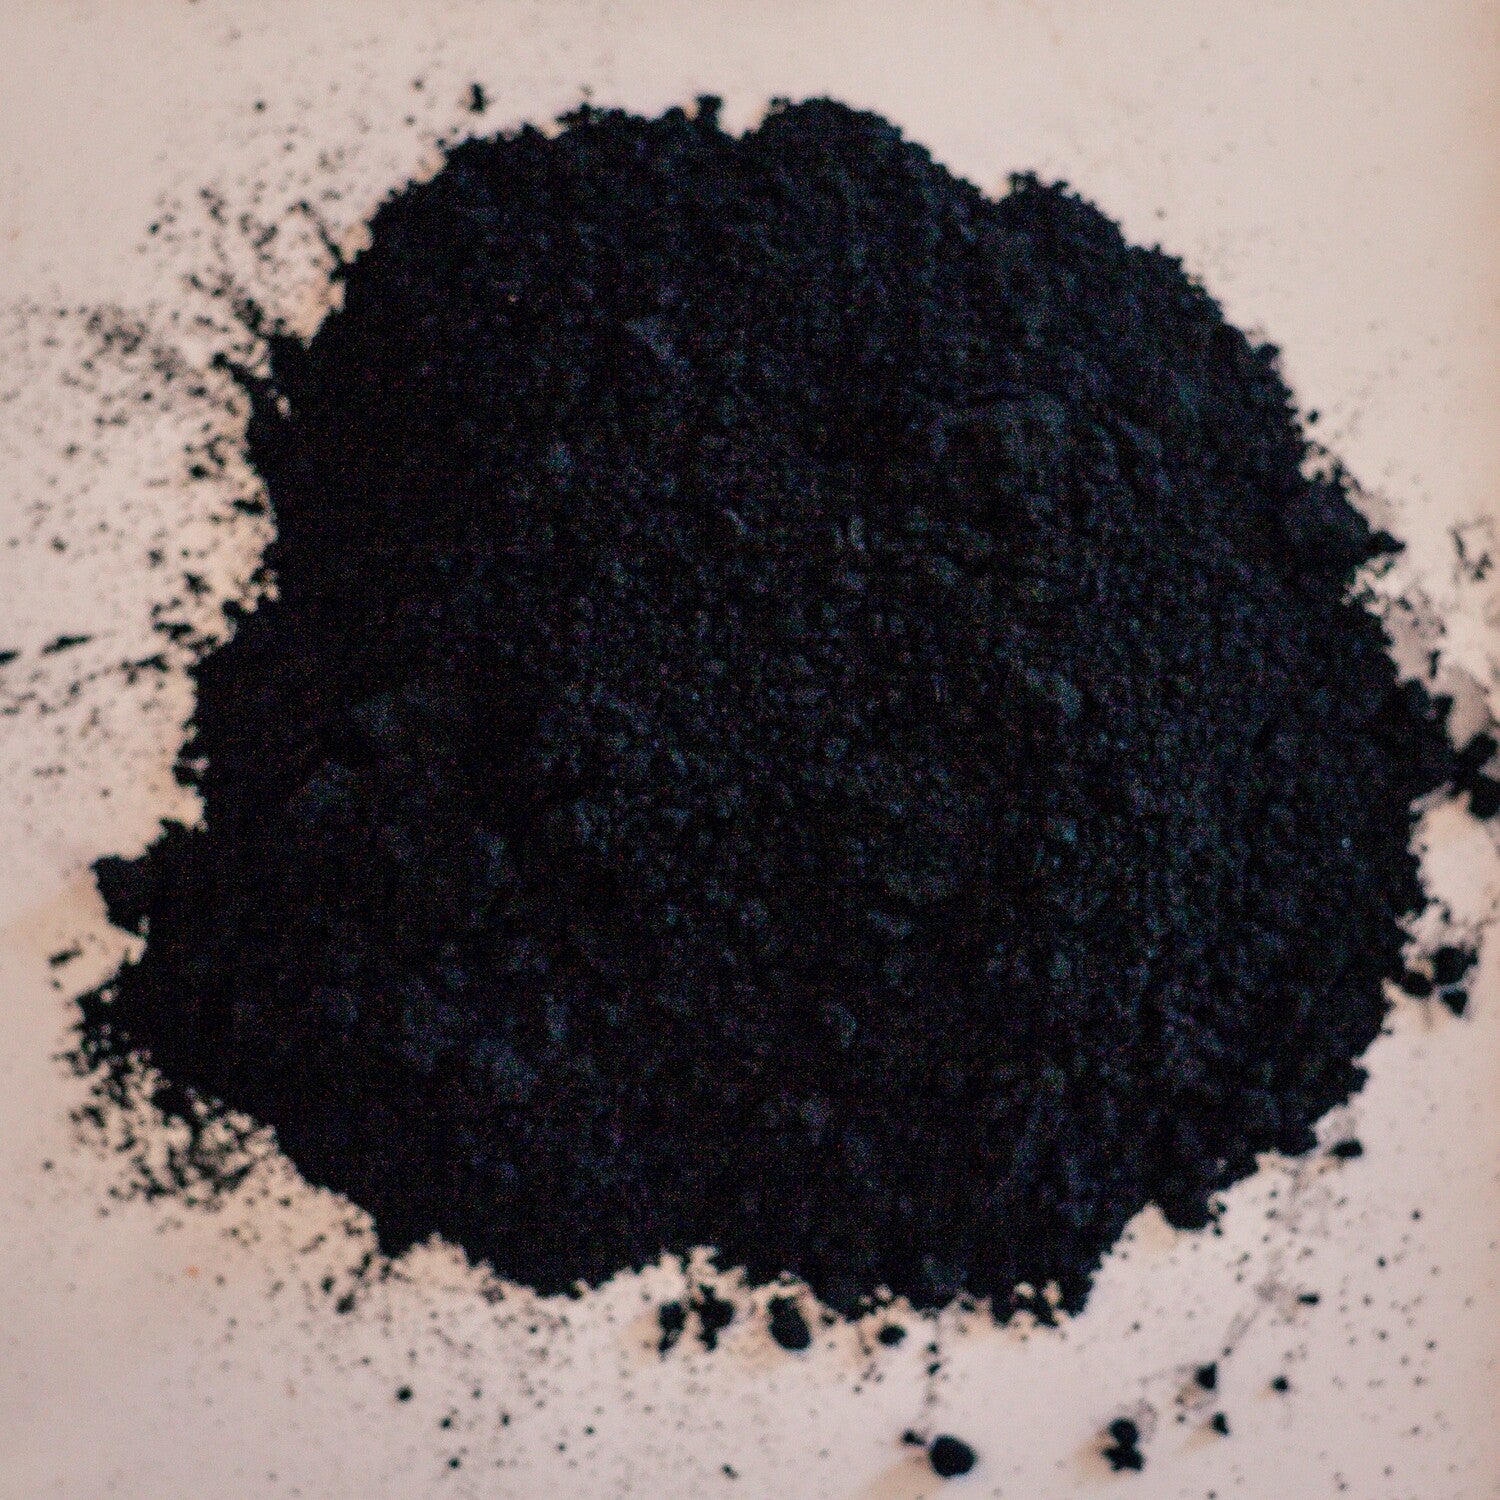 Activated Charcoal - Powder